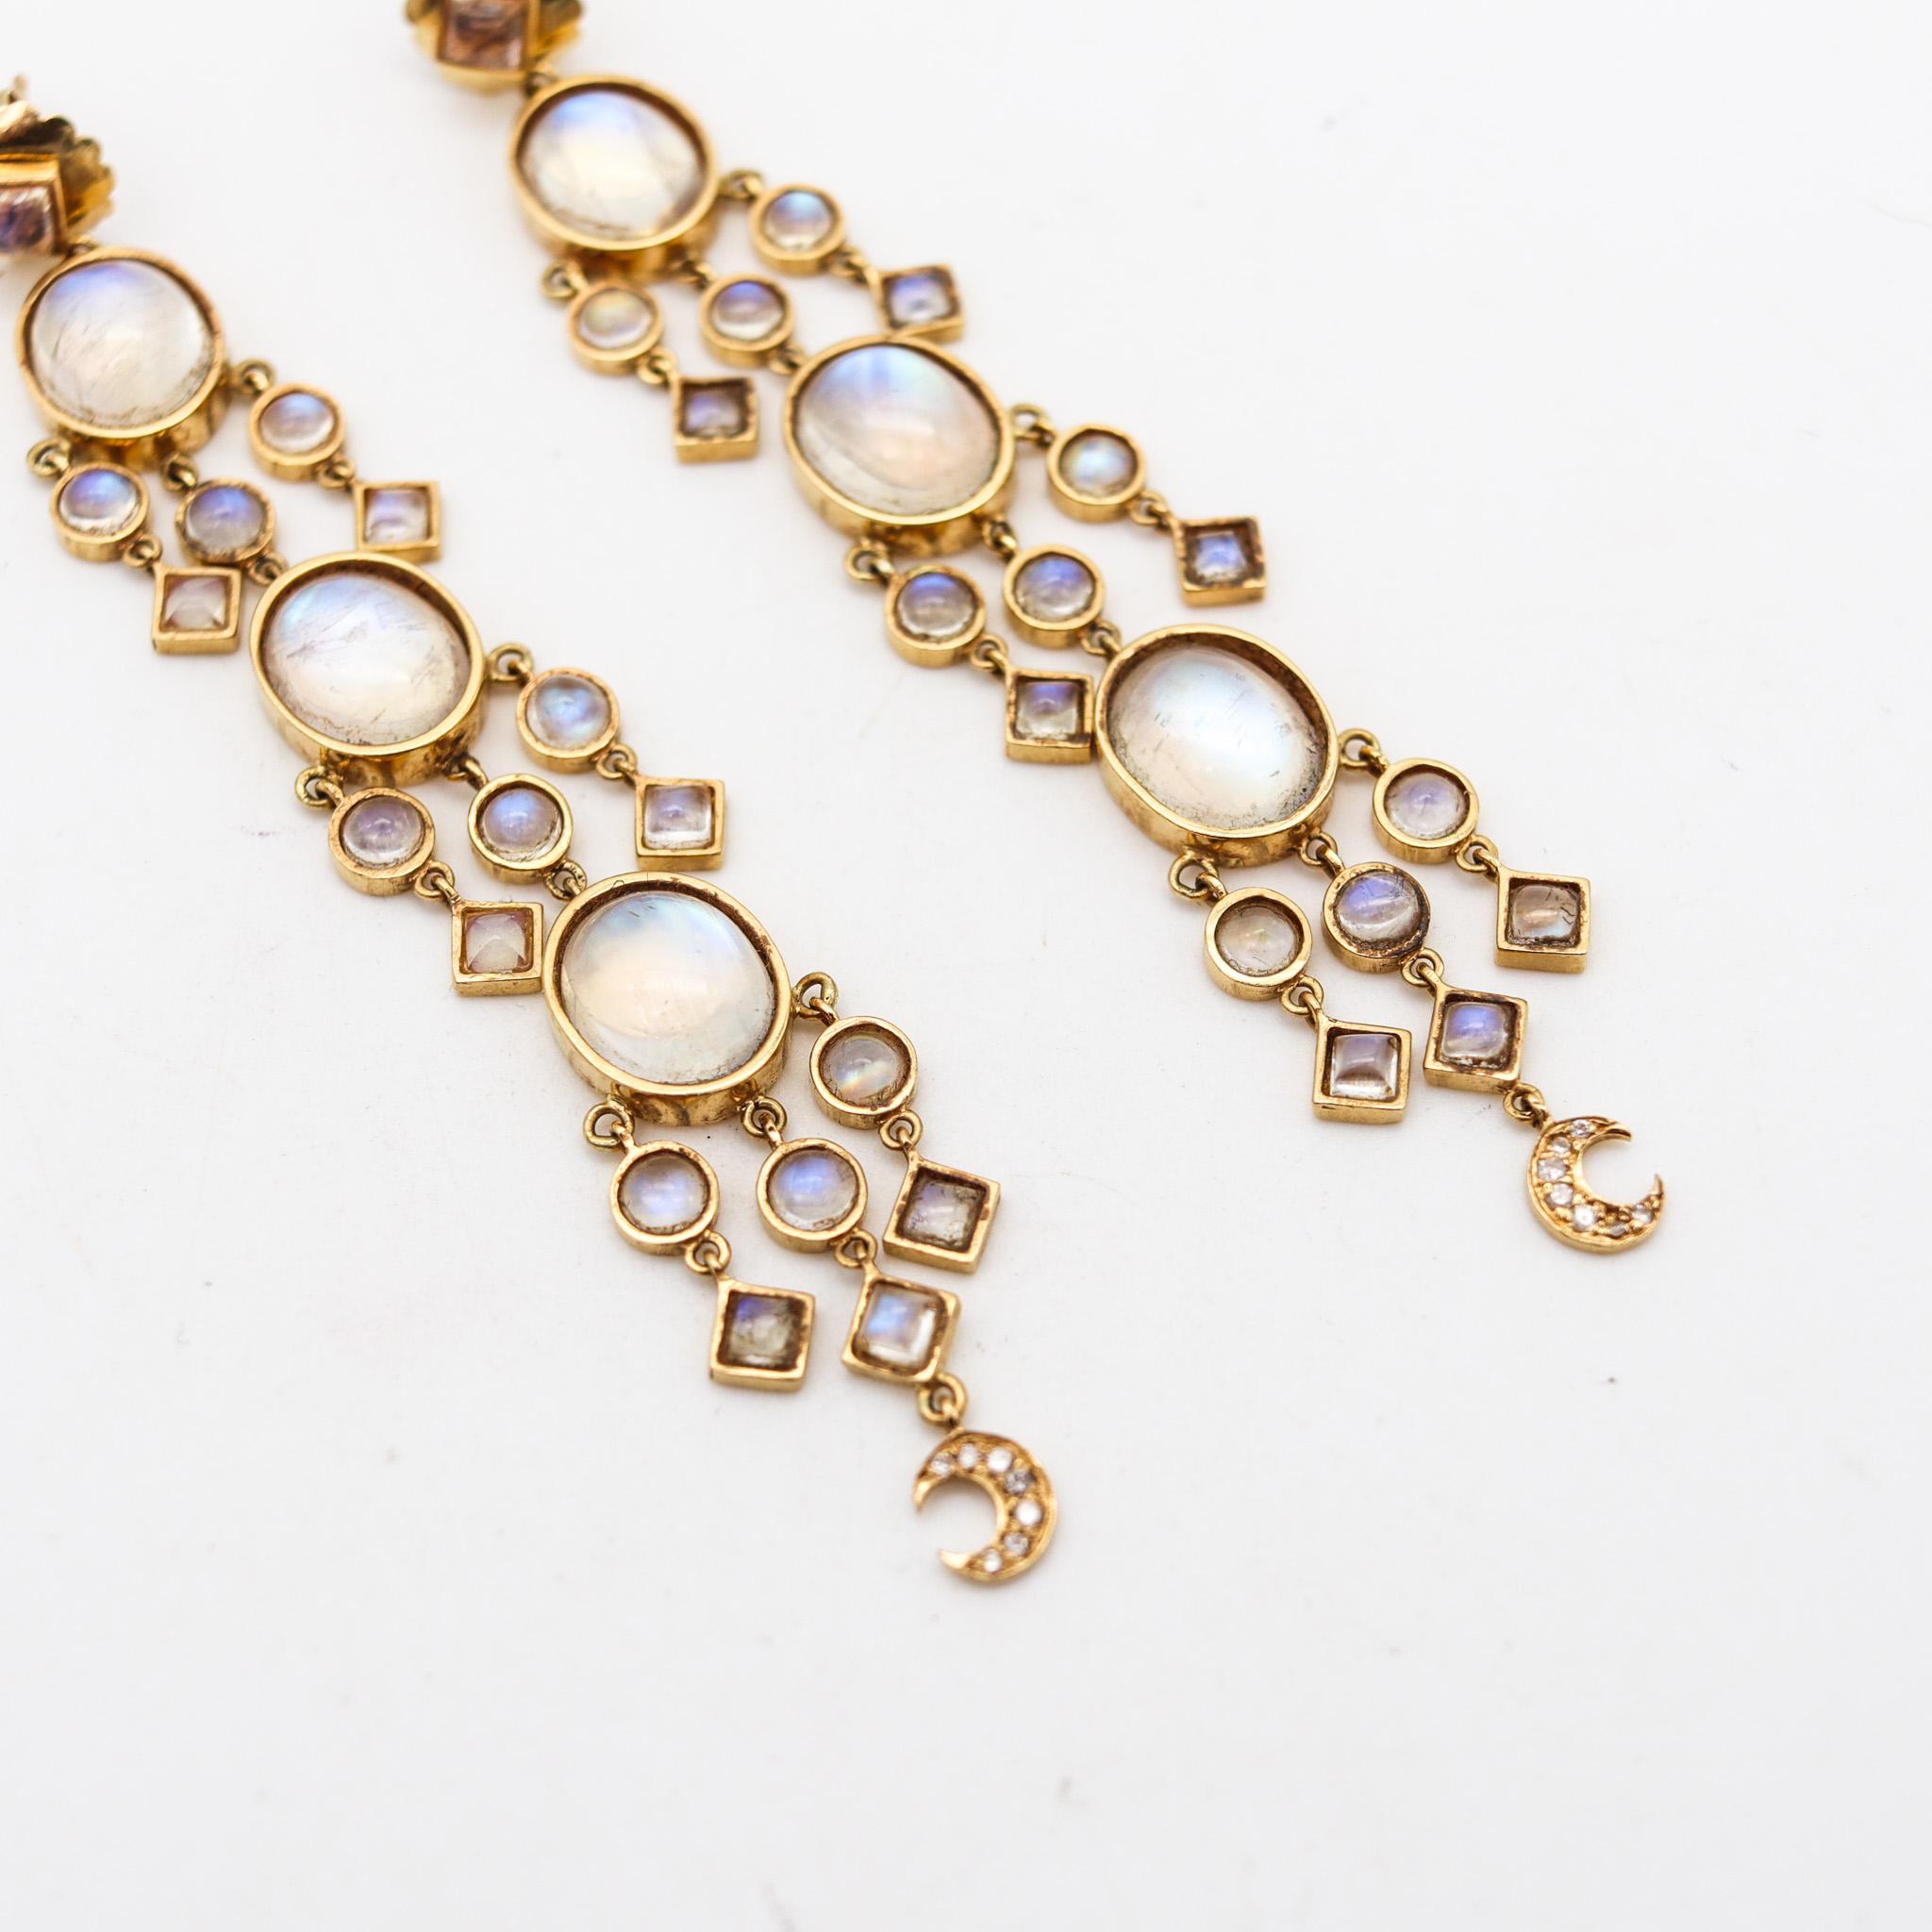 Modernist Temple St Clair Long Dangle Earrings In 18Kt Gold With 28.68 Ctw In Moonstones For Sale